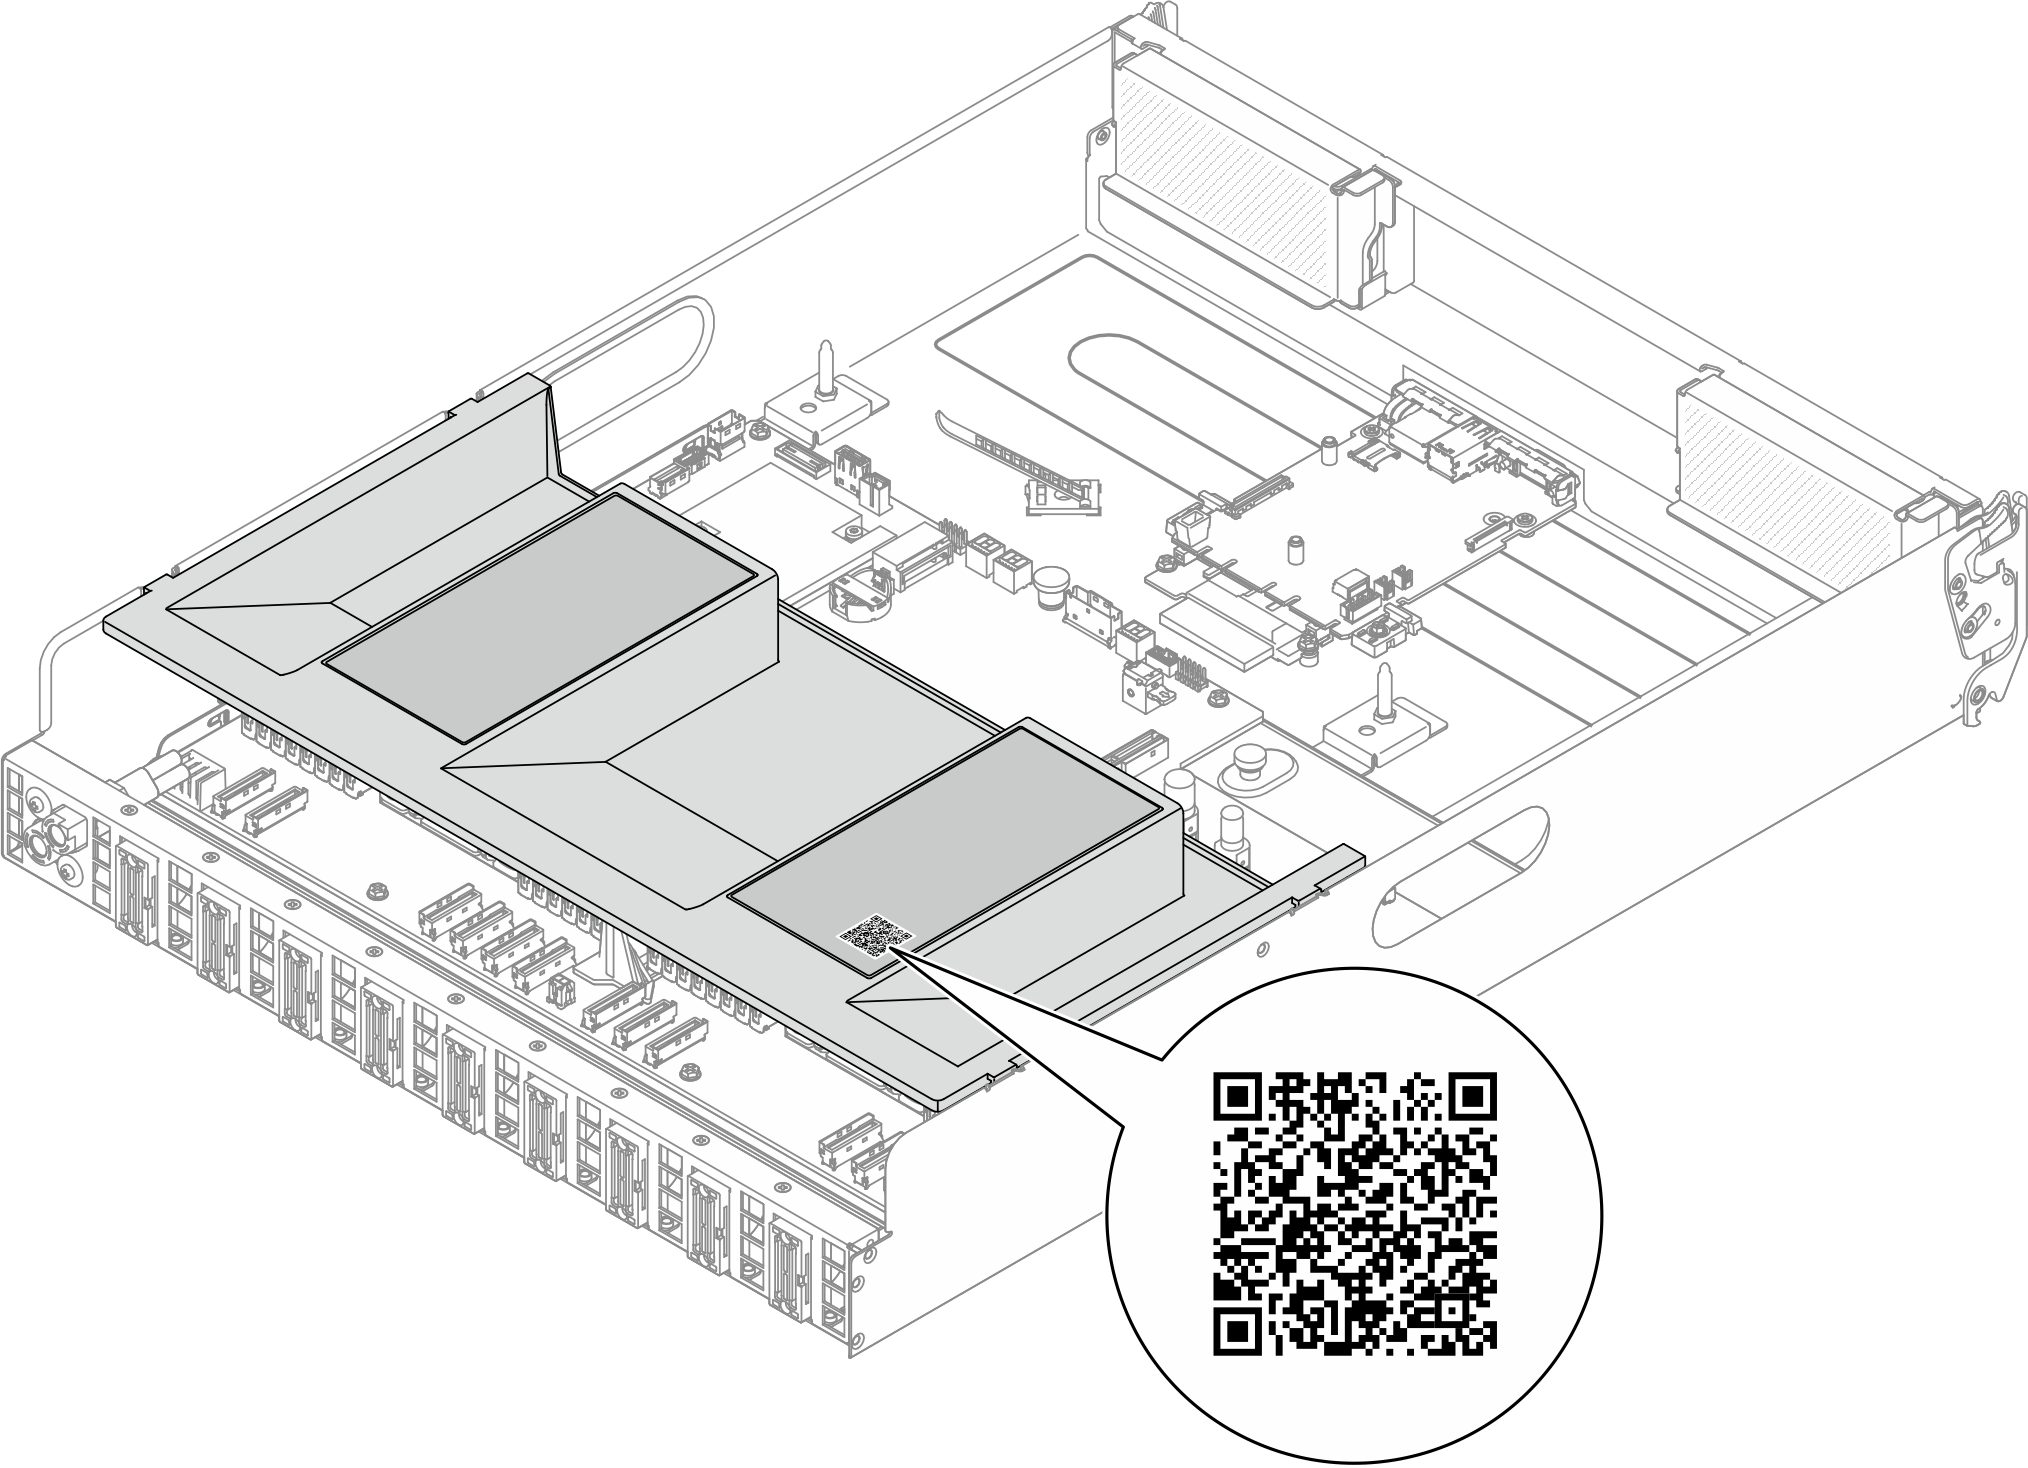 Service Label and QR code